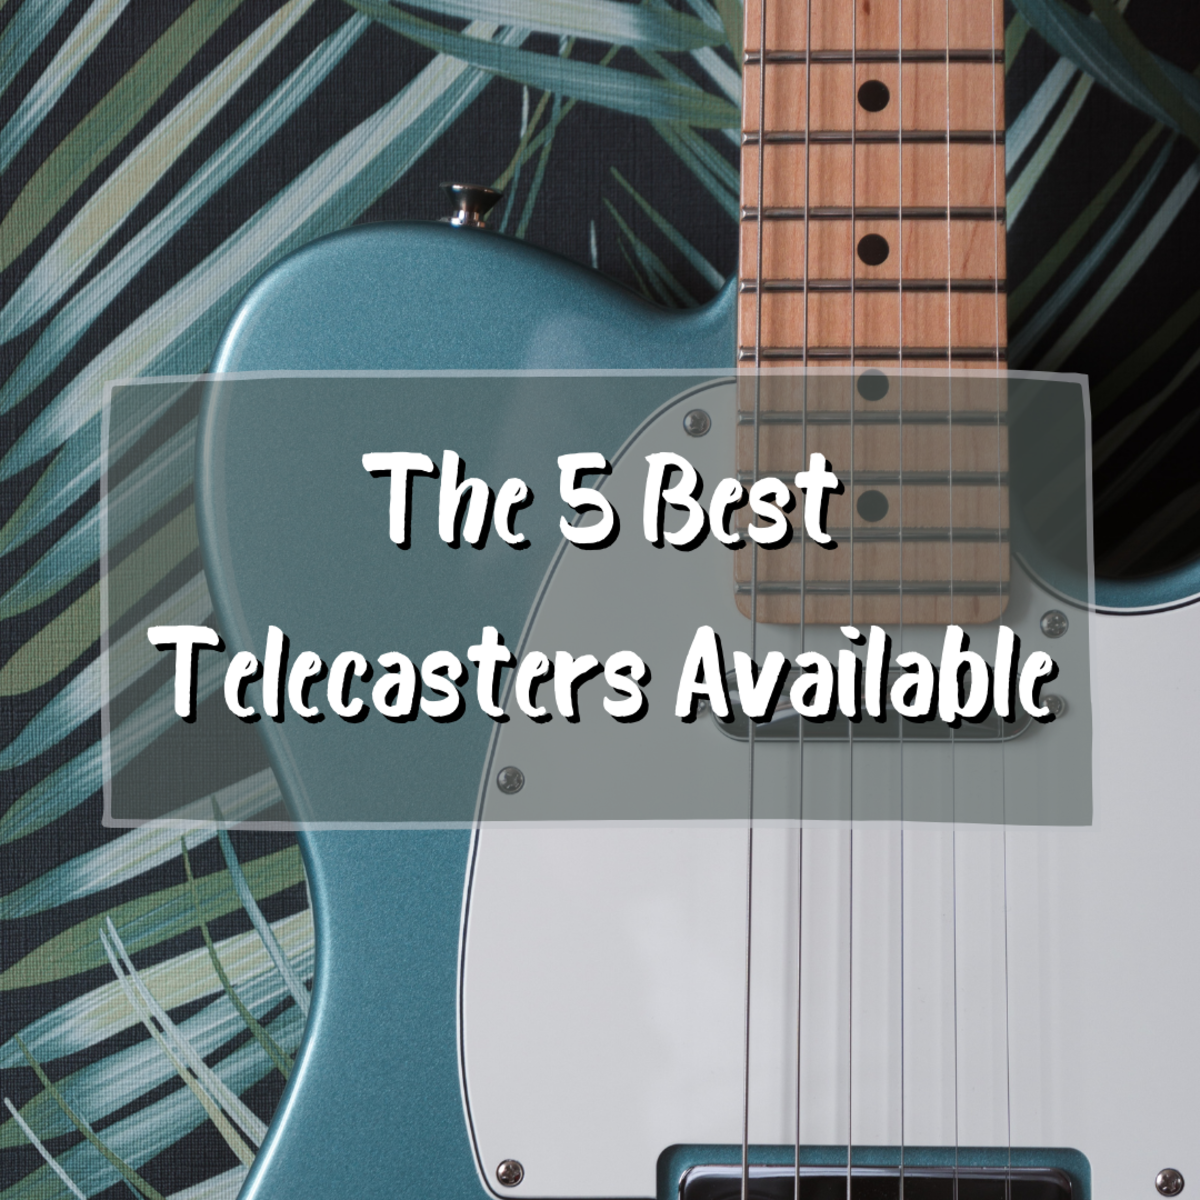 This article covers the 5 best Telecasters available today and provides demos and complete specifications. You'll also learn a bit about Leo Fender and the history of the Telecaster.